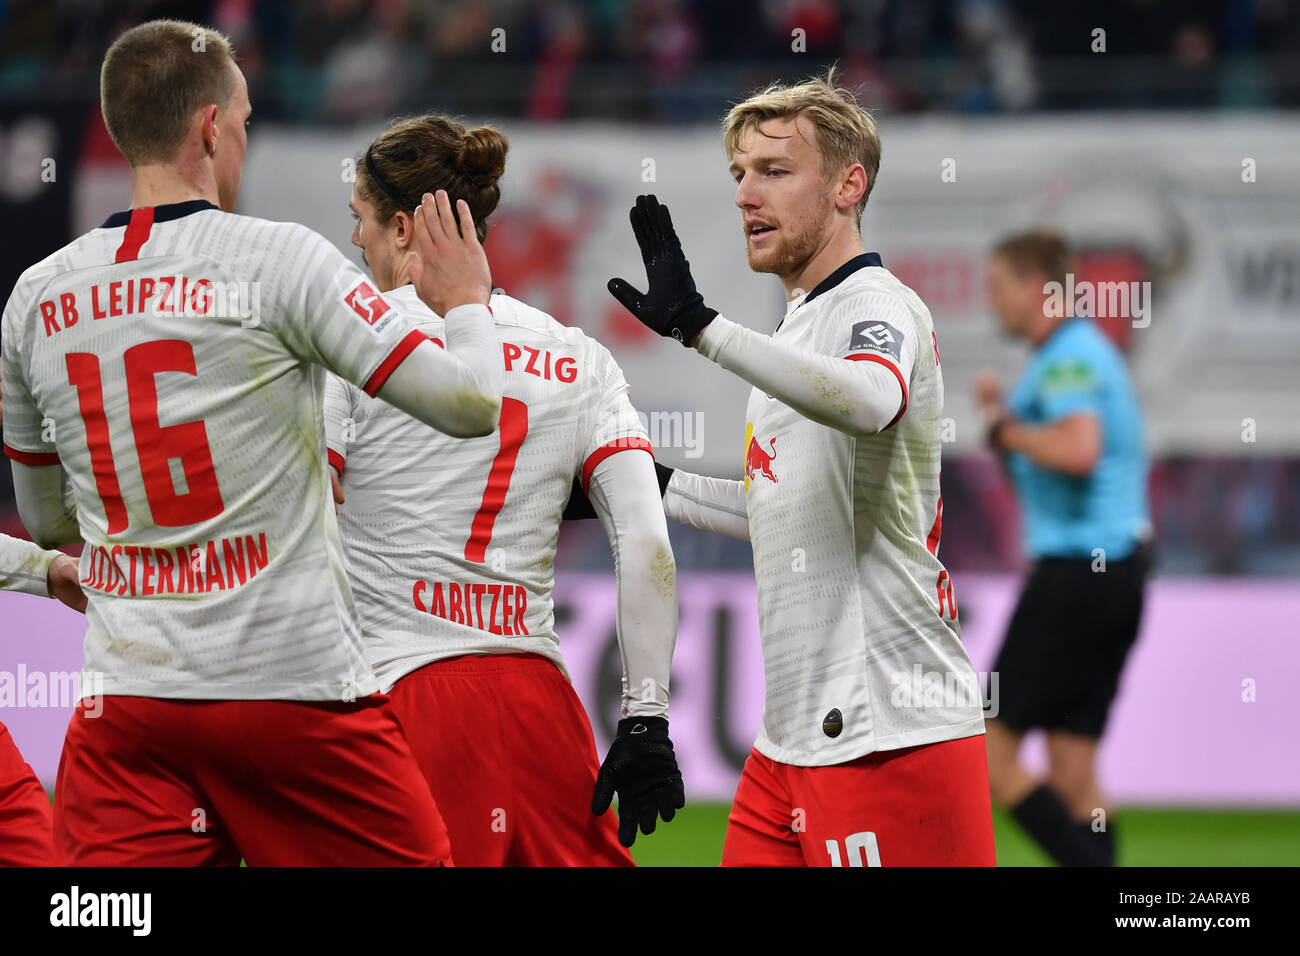 goaljubel Emil FORSBERG (L, right) after goal to 2-0 with Marcel SABITZER (L), Lukas KLOSTERMANN (L), jubilation, joy, enthusiasm, action. Soccer 1. Bundesliga, 12.matchday, matchday12, RB Leipzig (L) - 1.FC Cologne (K) 4-1, on 23/11/2019 in LEIPZIG, REDBULLARENA, DFL REGULATIONS PROHIBIT ANY USE OF PHOTOGRAPHS AS IMAGE SEQUENCES AND/OR QUASI-VIDEO. | usage worldwide Stock Photo